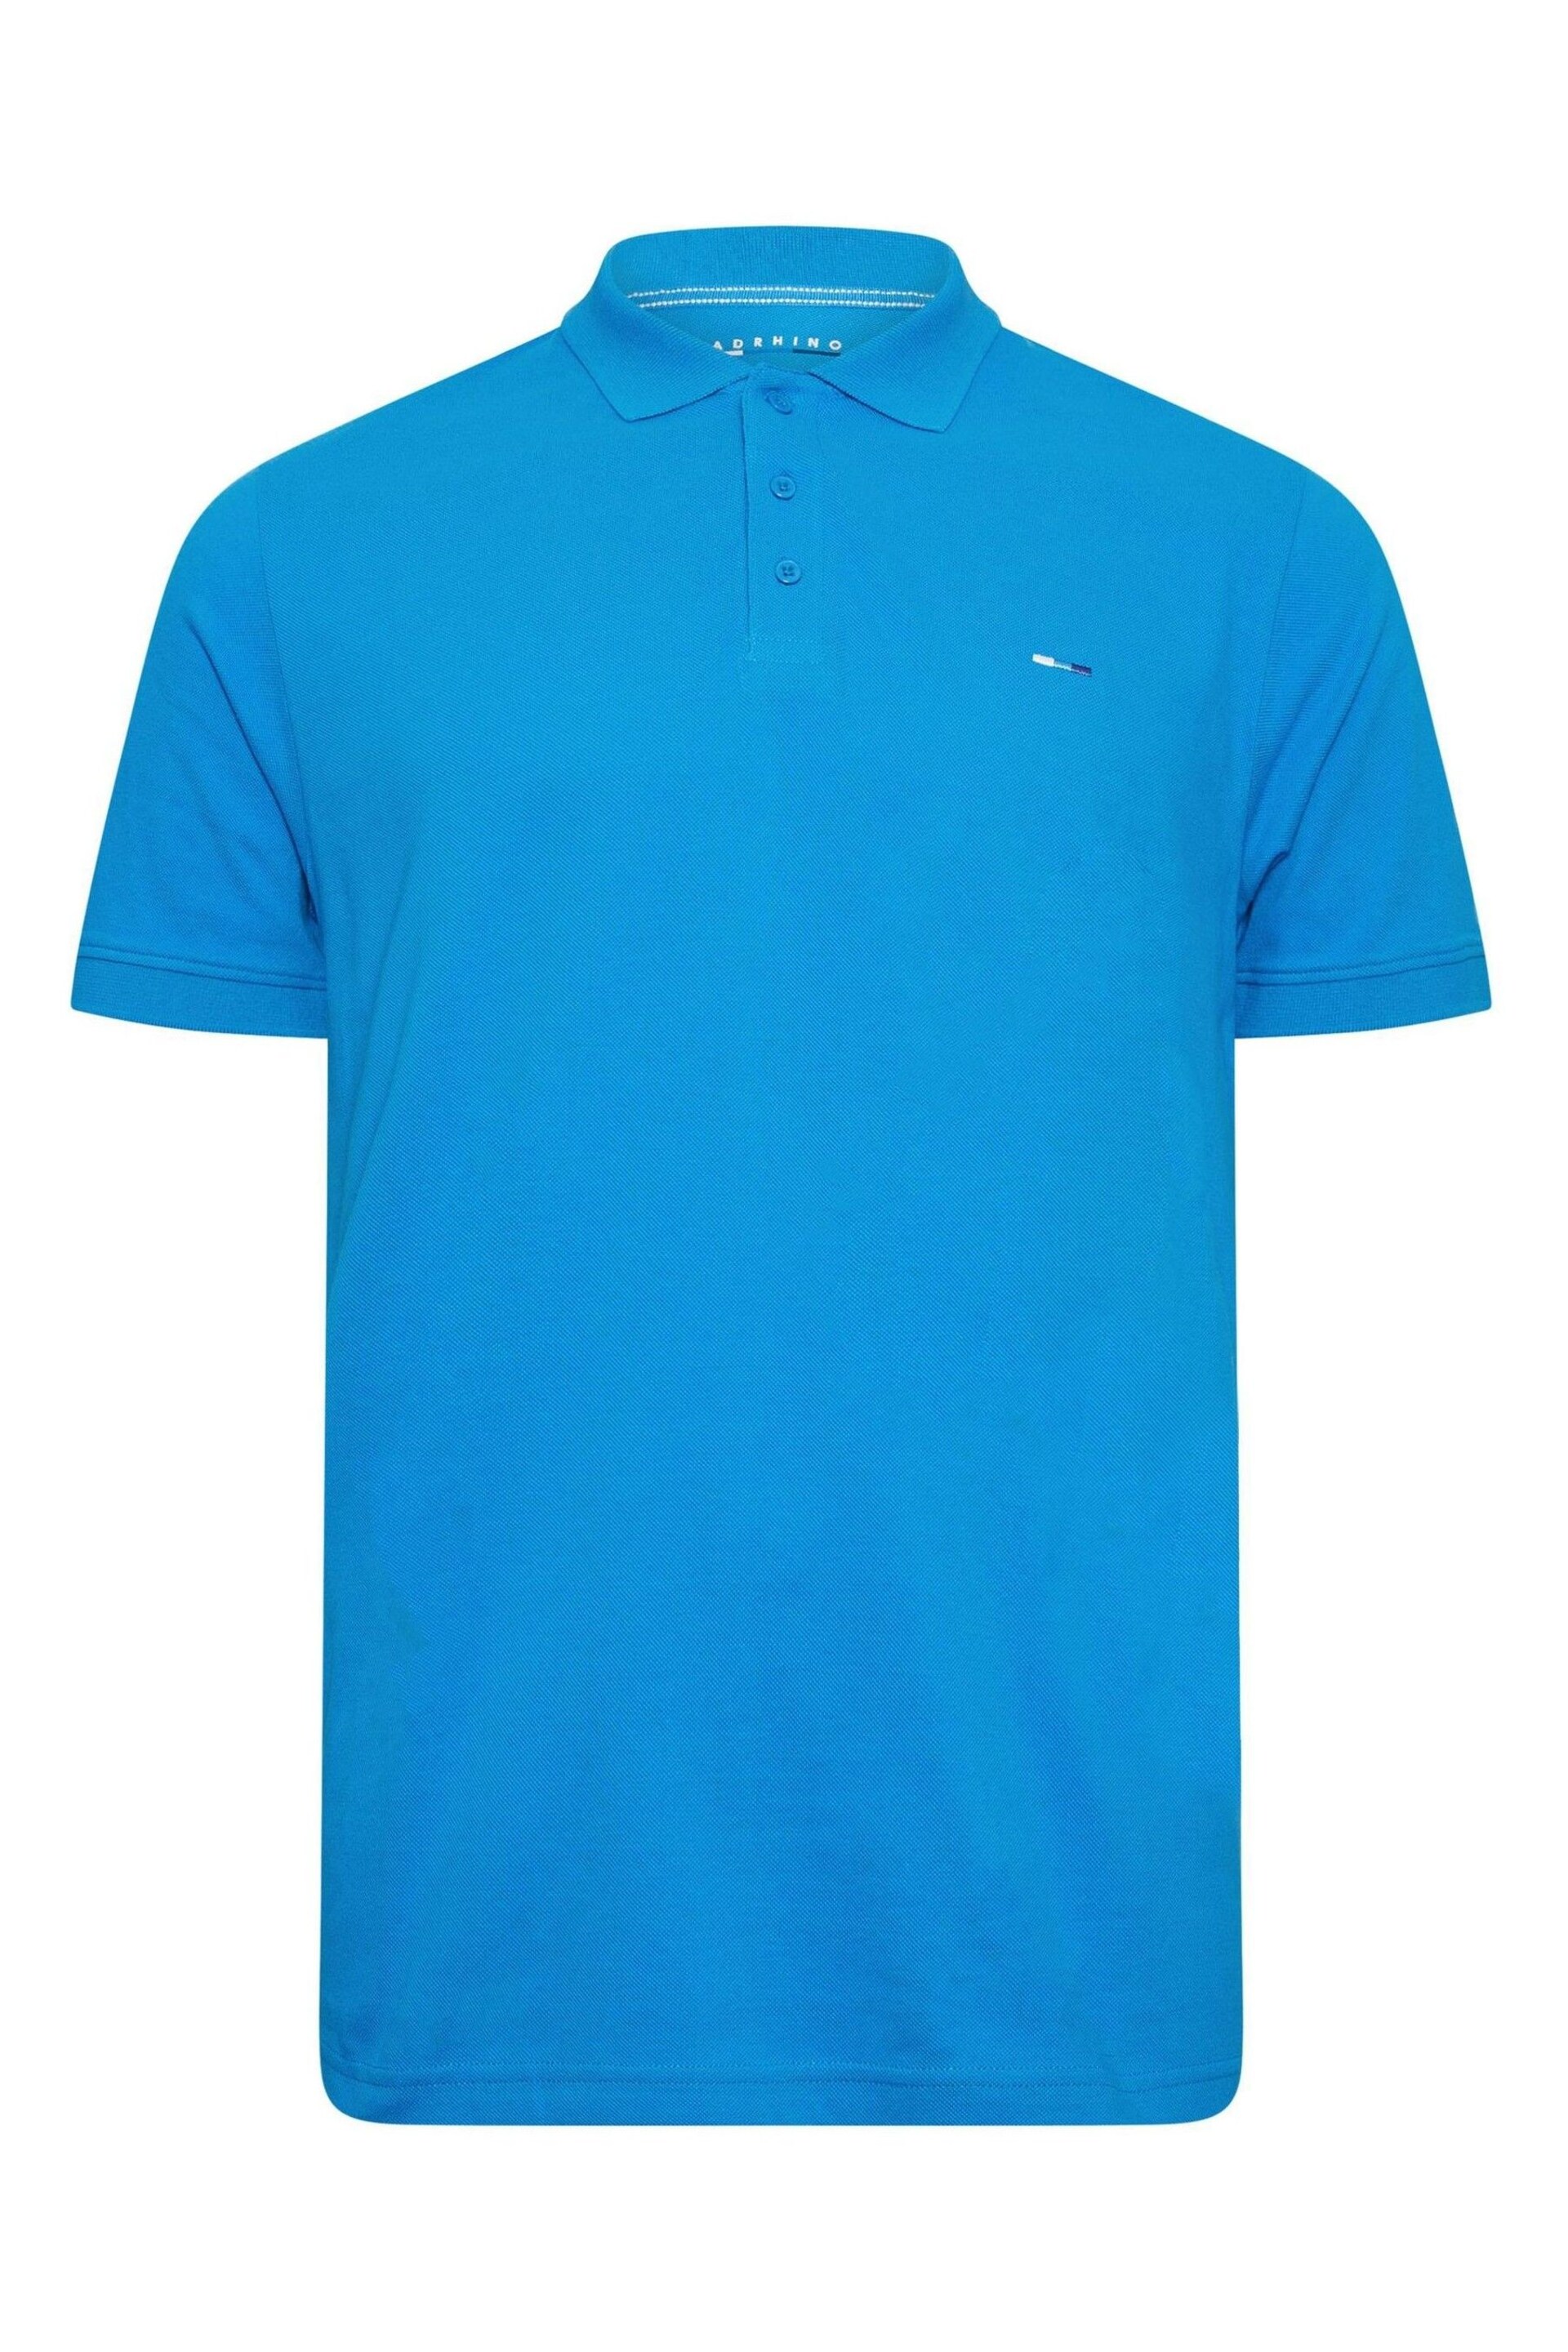 BadRhino Big & Tall Blue/Pink/Teal 3 Pack Polo Shirts - Image 6 of 7